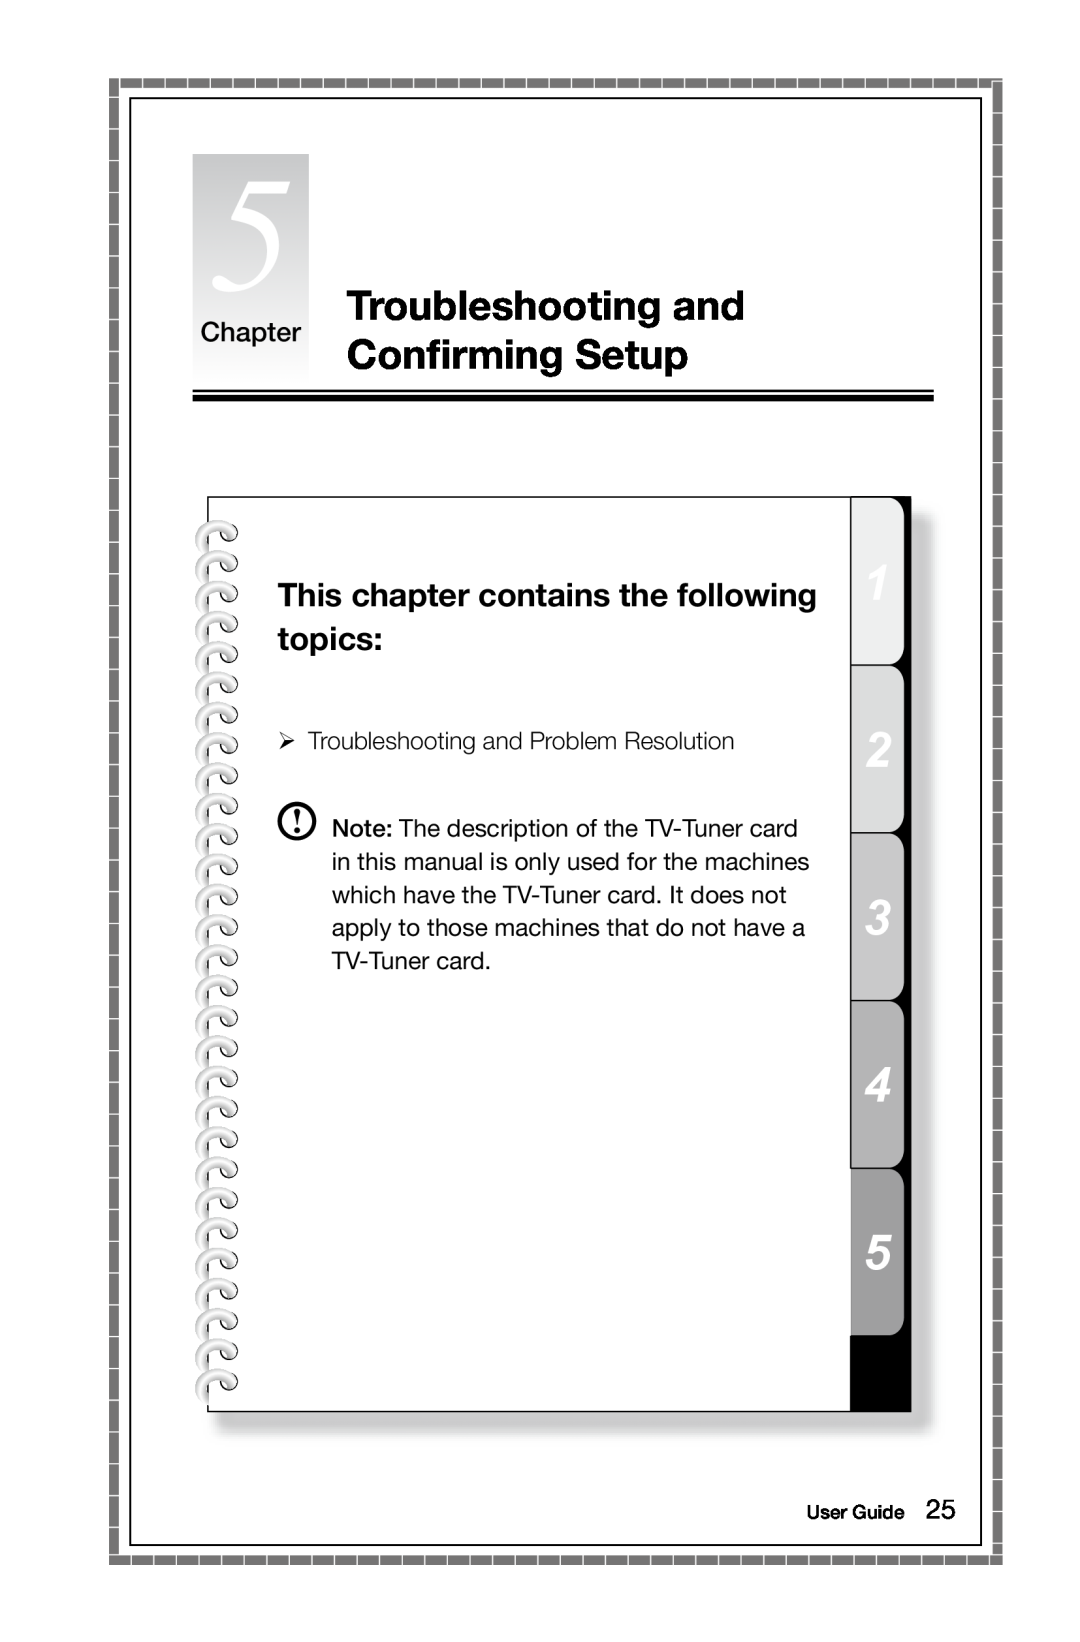 Lenovo 10041-10049 Troubleshooting and Chapter Confirming Setup, This chapter contains the following topics, User Guide 